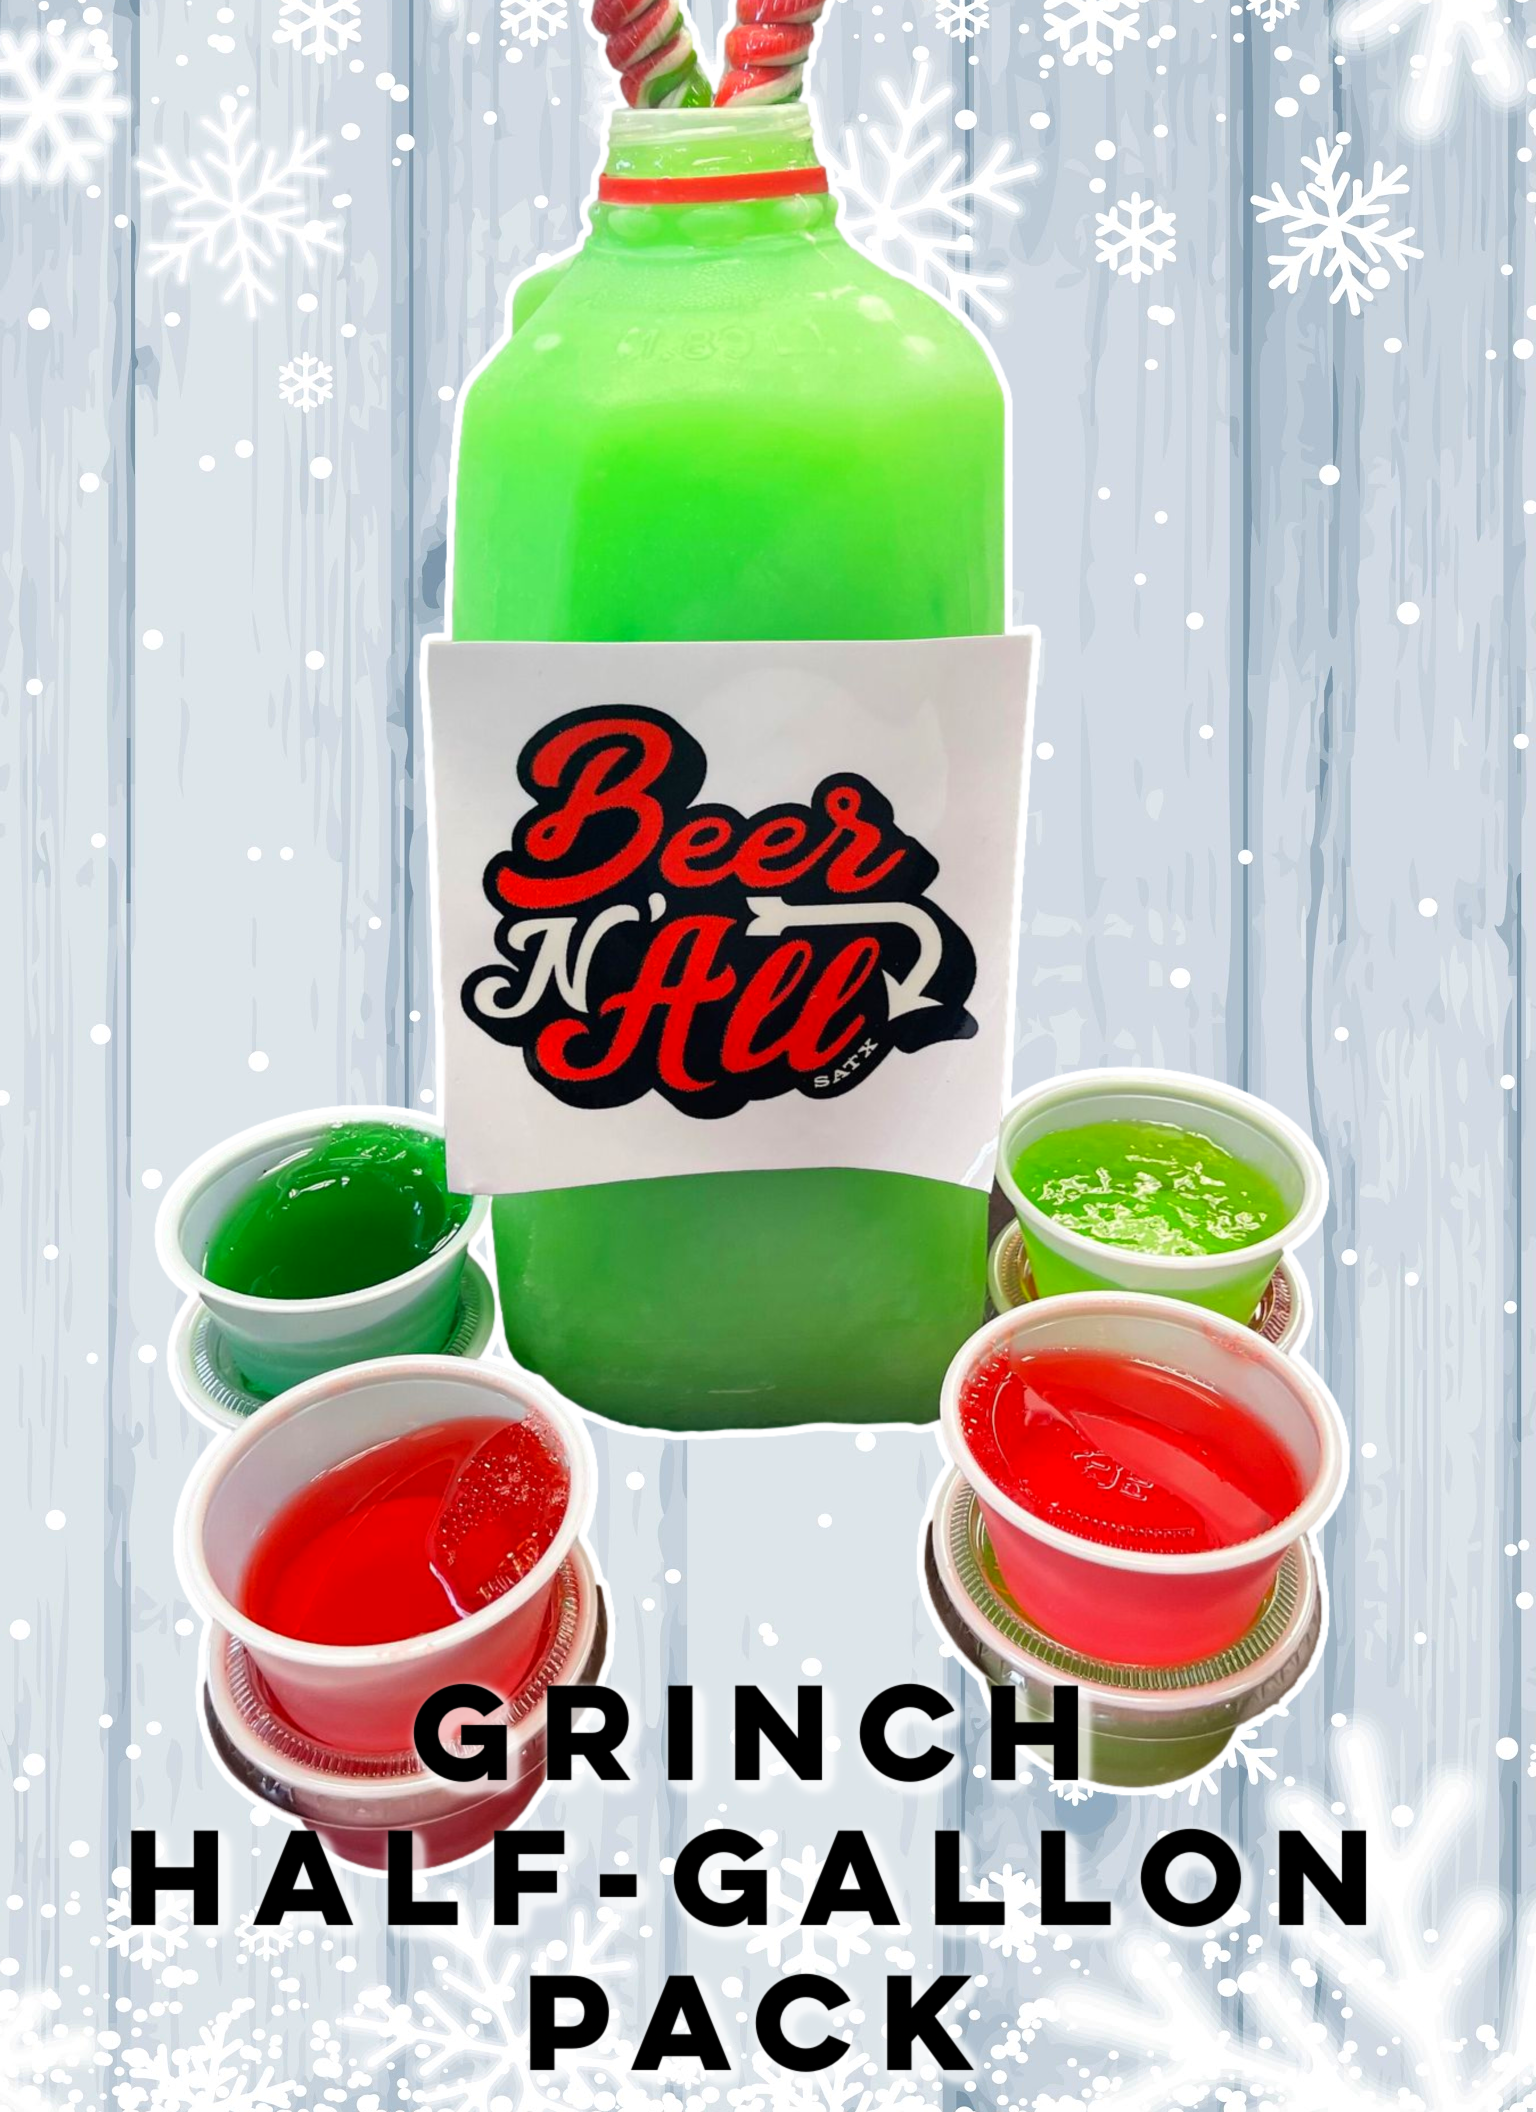 Grinch Half-Gallon Party Pack